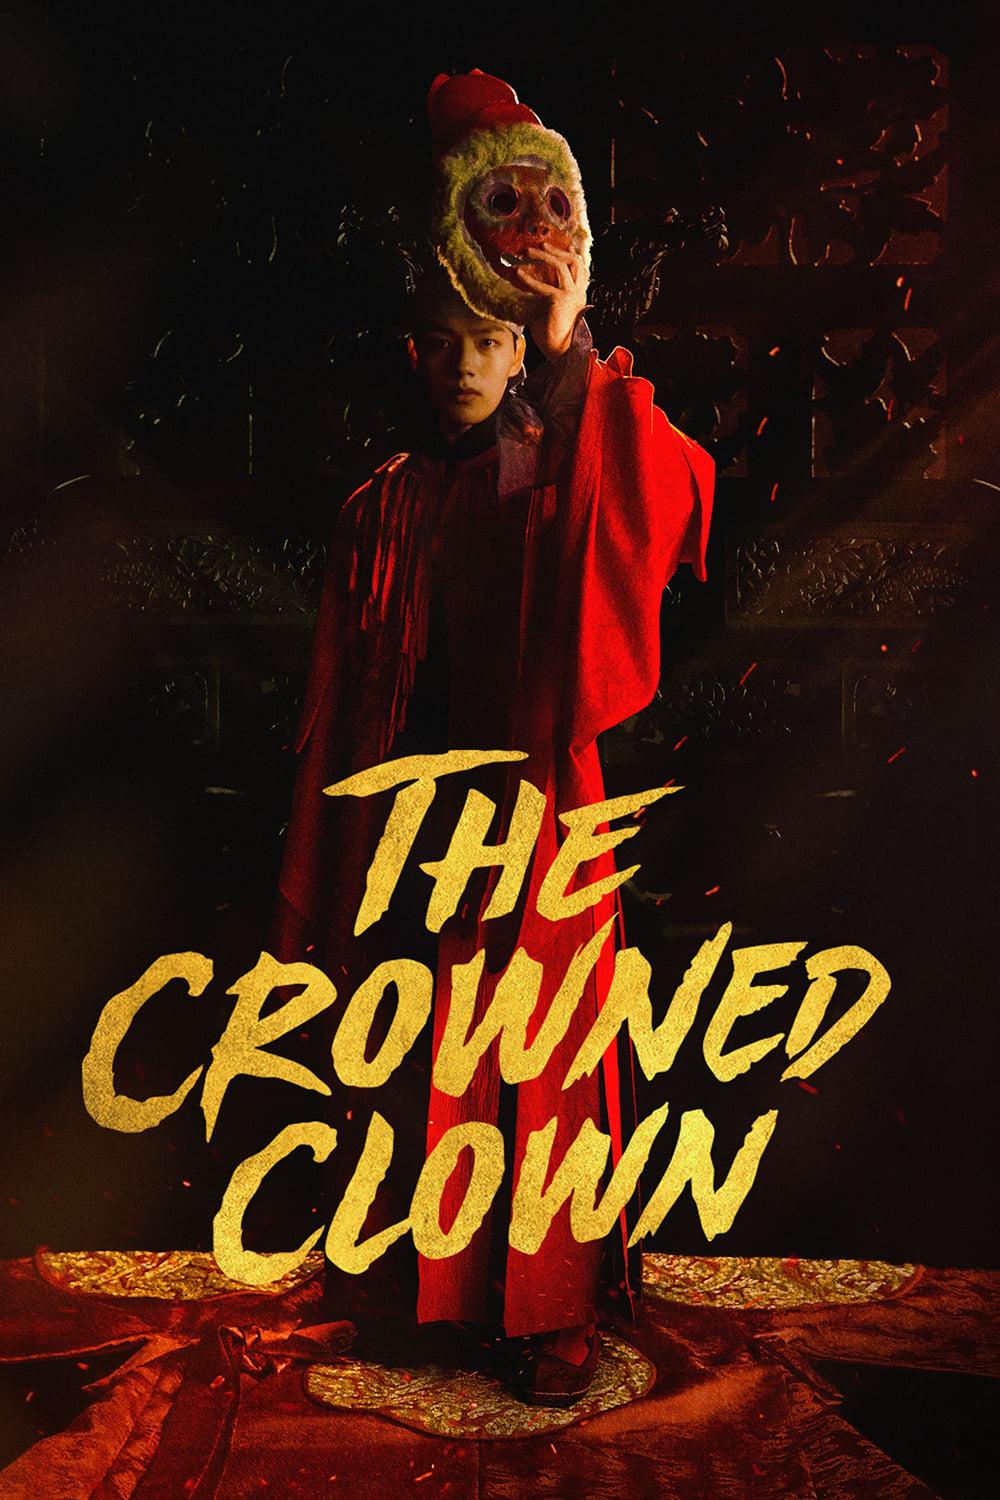 The Crowned Clown poster